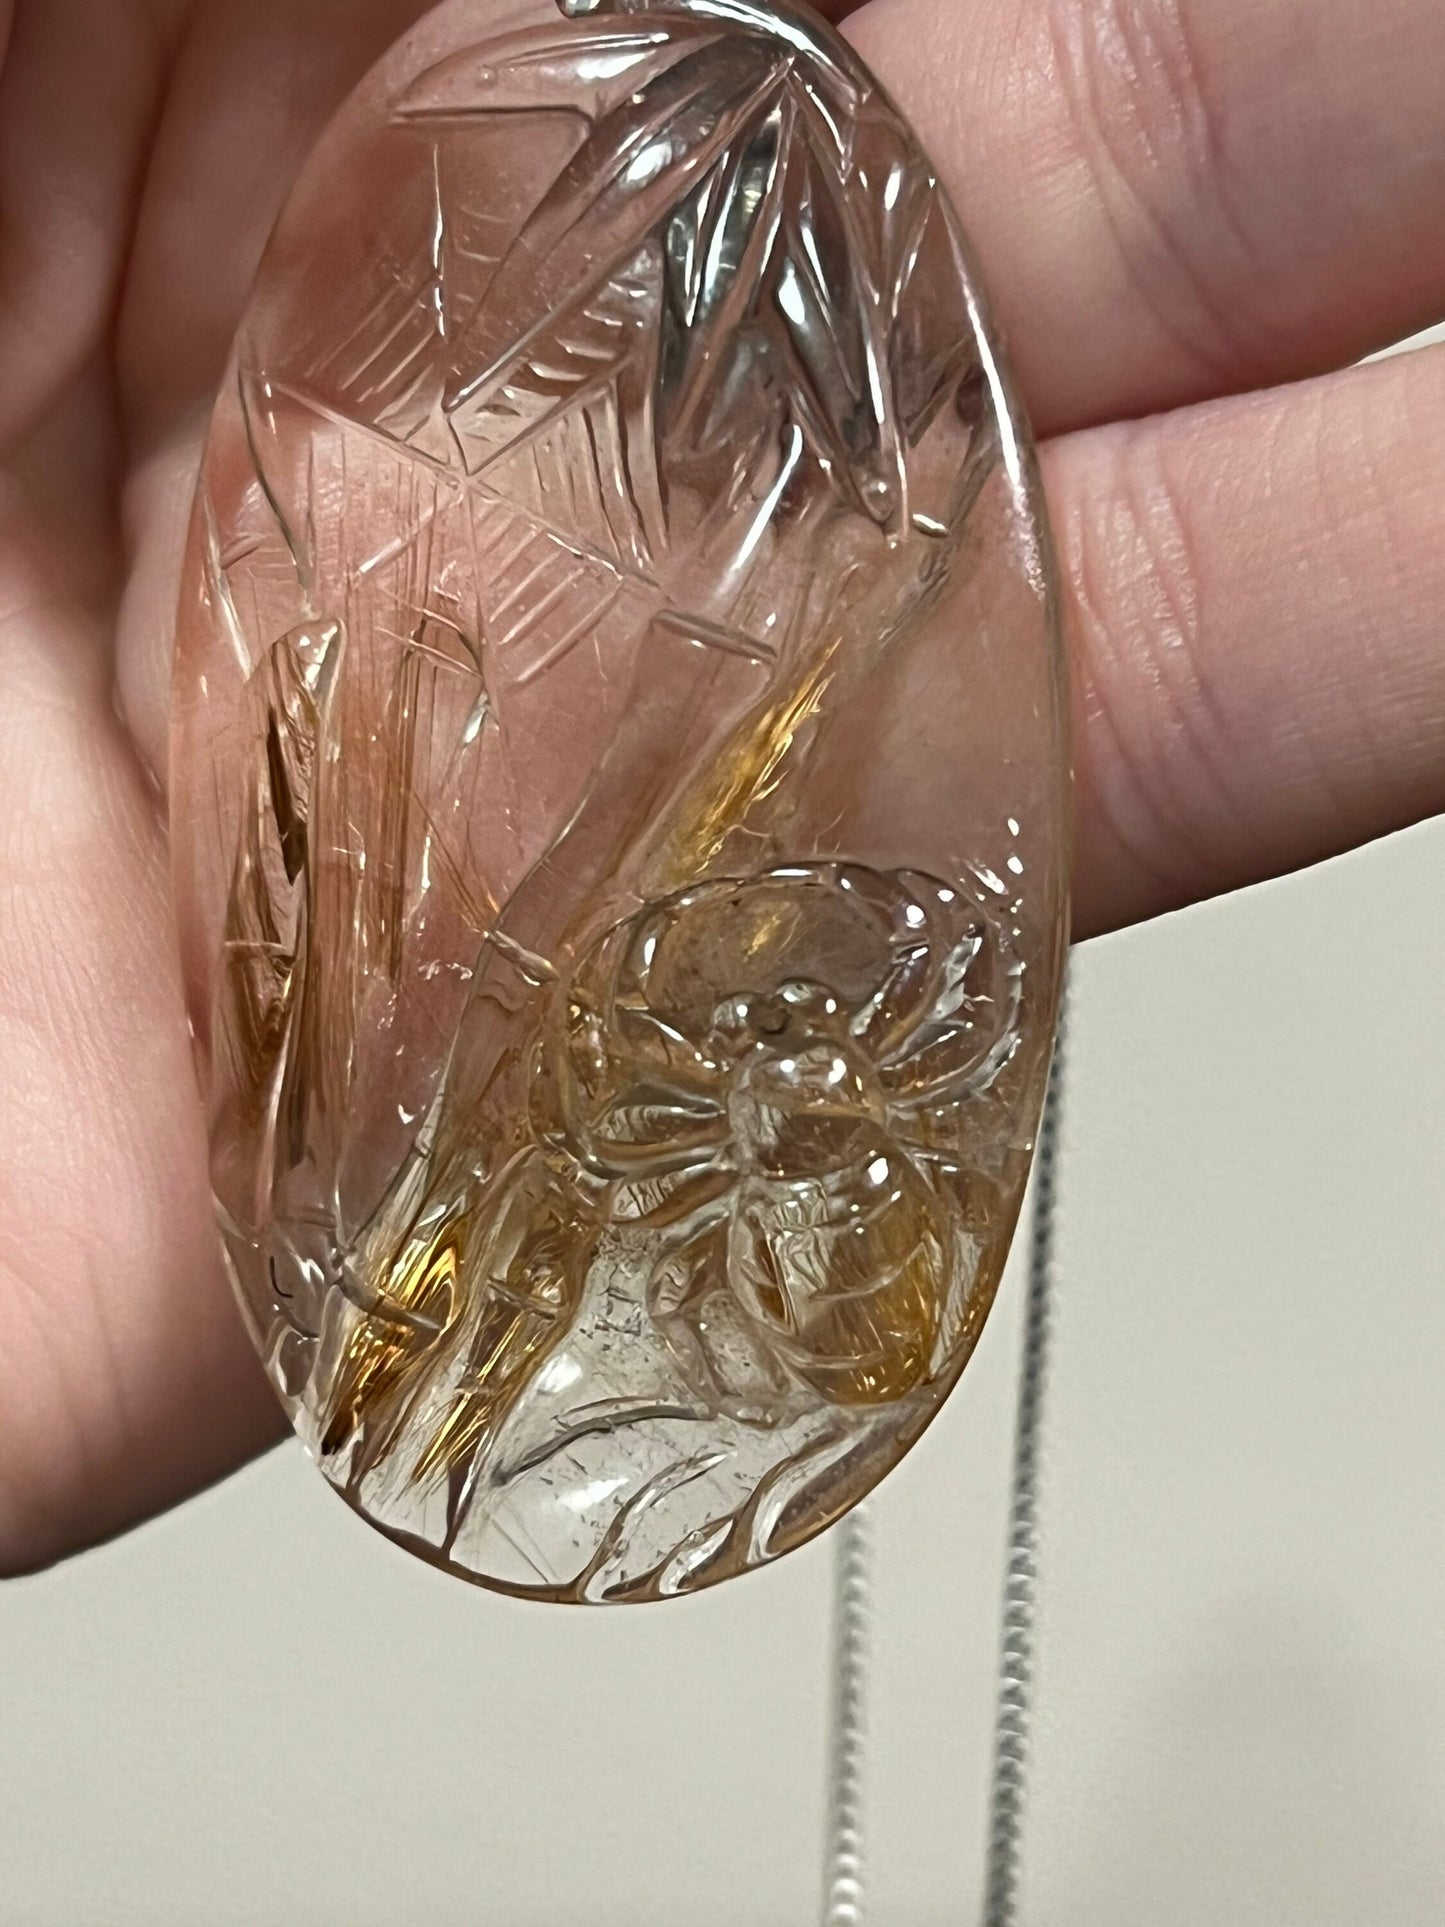 Golden Rutile Clear Quartz Spider Pendant with Sterling Silver Chain Necklace (Optional)